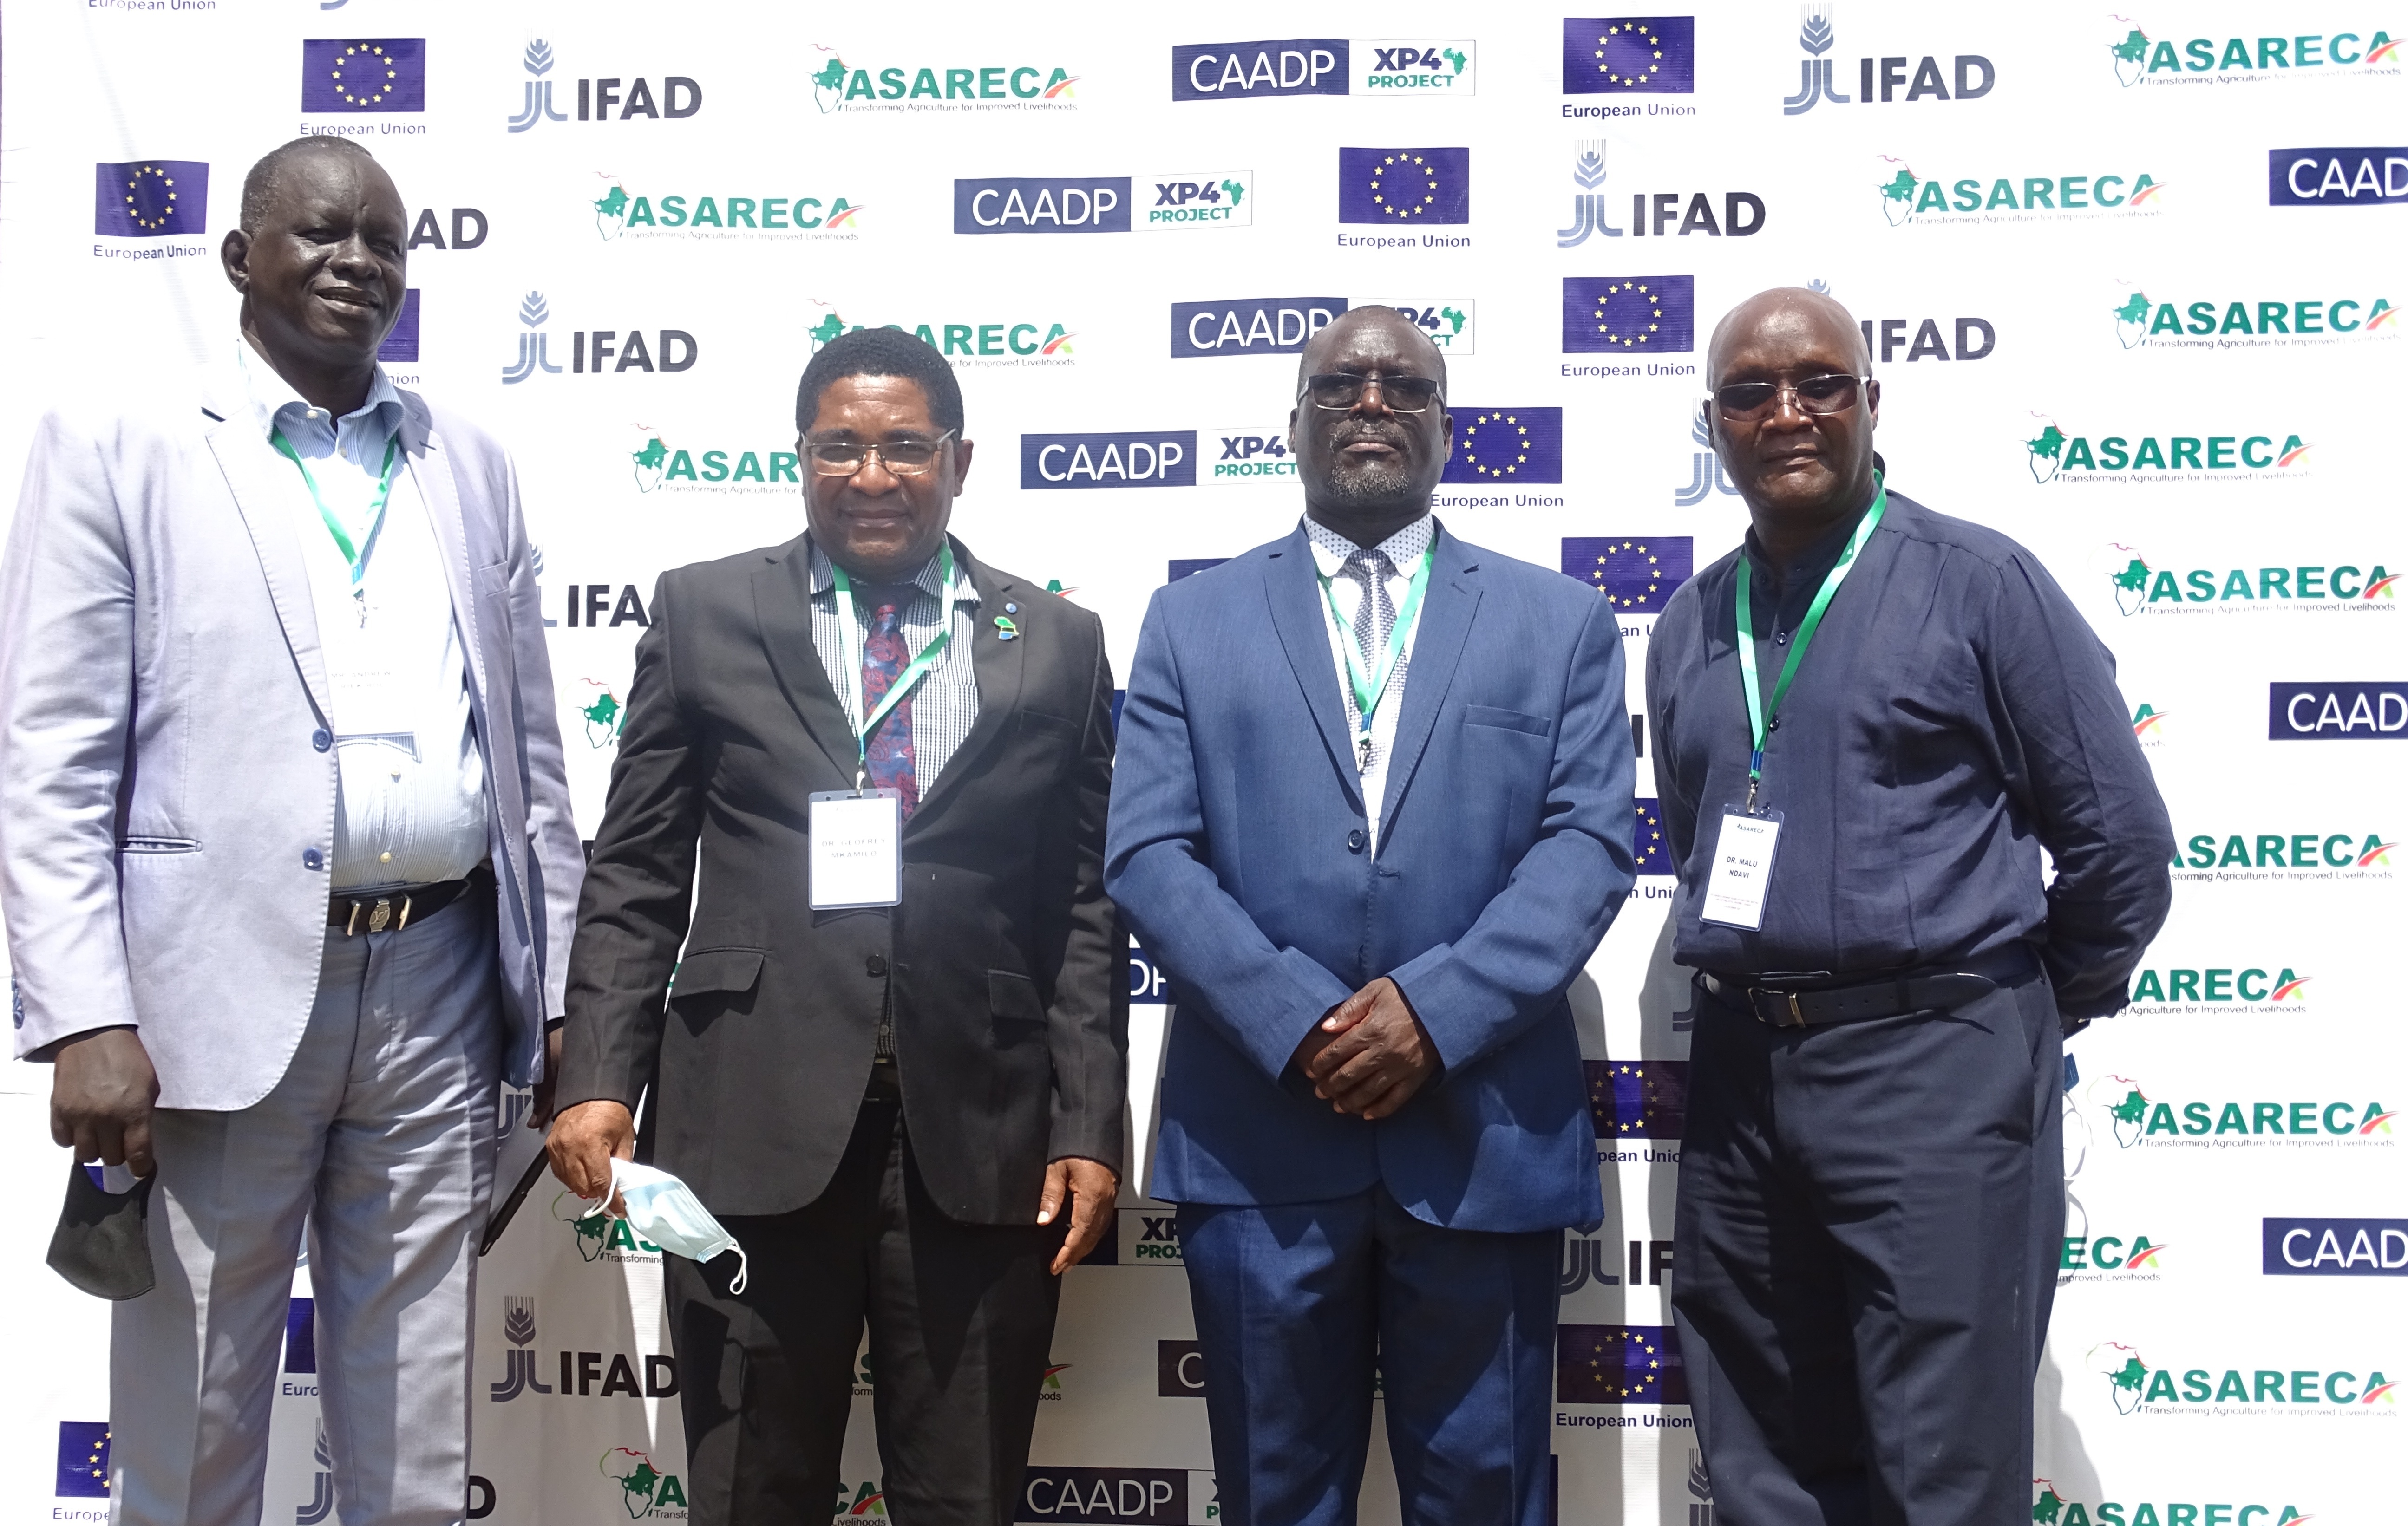 Dr. Warinda (2nd R), Dr. Mkamilo (2nd L) joined by Dr. Malu Ndavi (R), the Manager of the EU funded and IFAD managed CAADP-XP4 Programme, and Prof. Andrew Bol Wieu Riak, ASARECA Board member during the 31st BoD meeting in Entebbe, Uganda